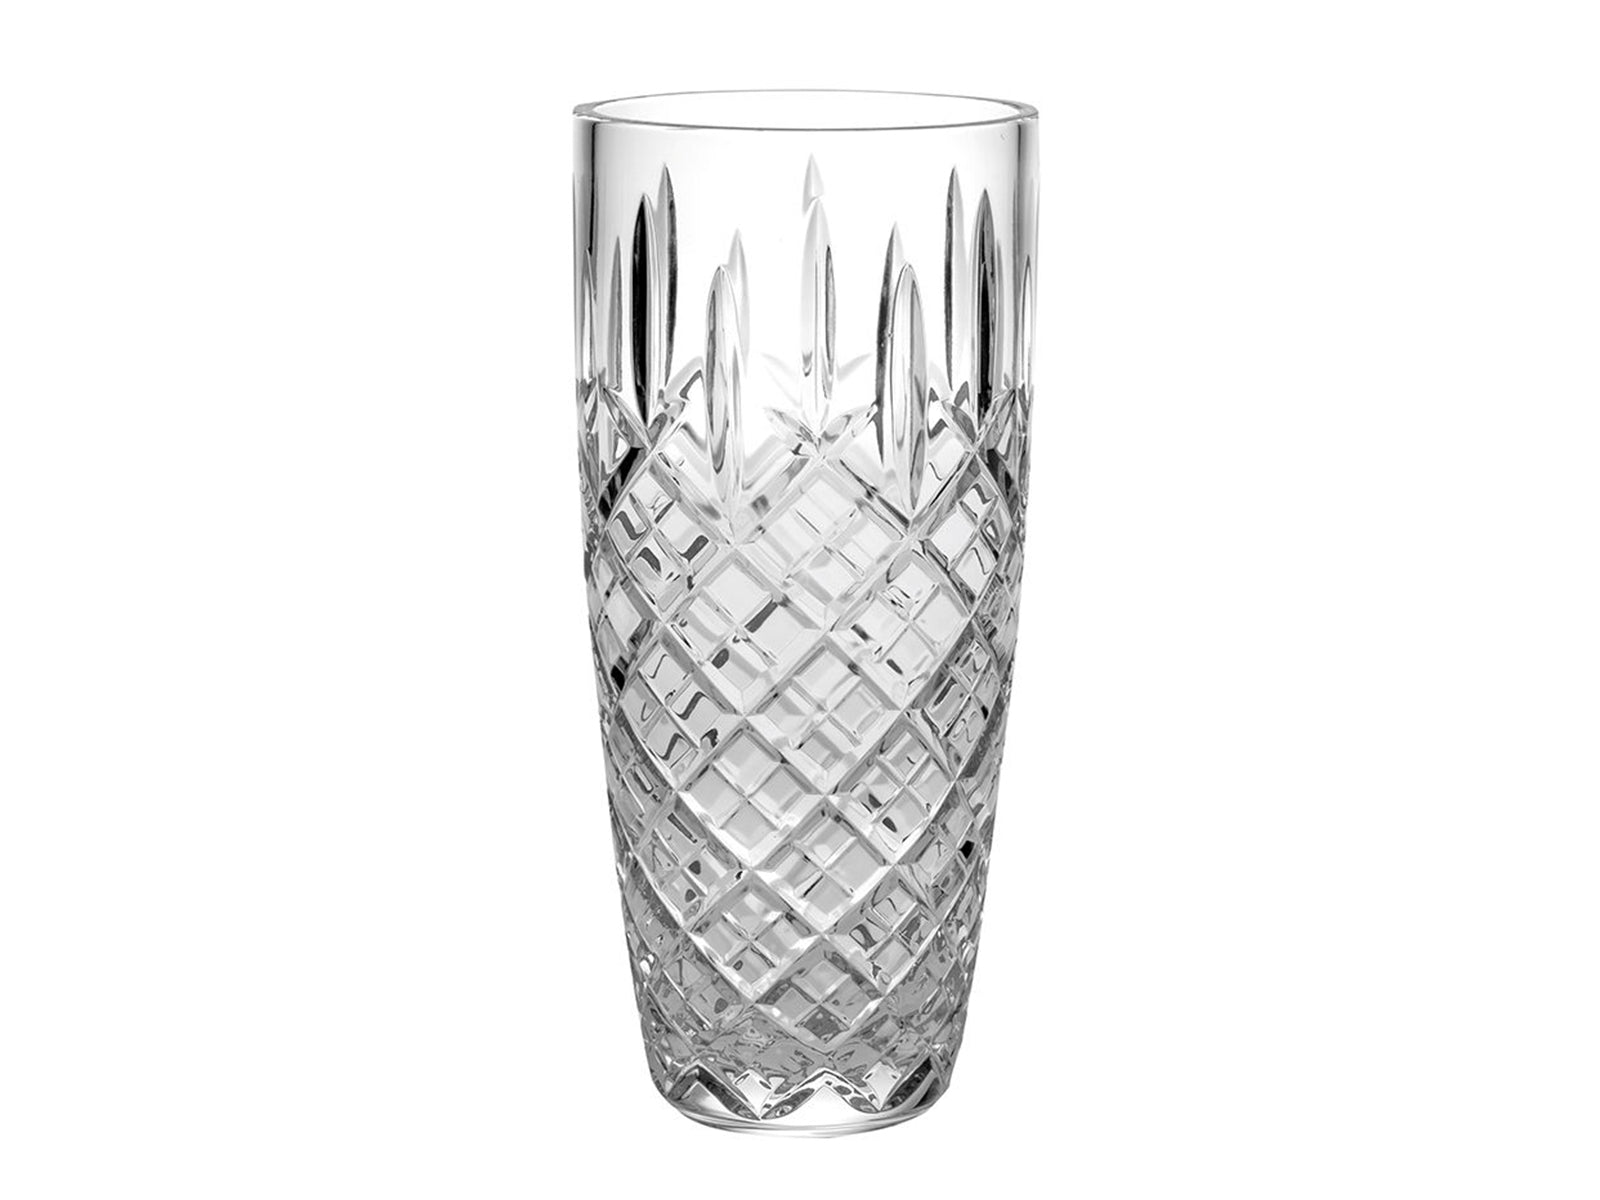 This Royal Scot Crystal London Vase - Barrel / Tall has been hand-cut by expert artisans with the elegant London design. Perfect for displaying larger bouquets, this vase is tall and wide-mouthed, along with a weighted base making it perfect for display.